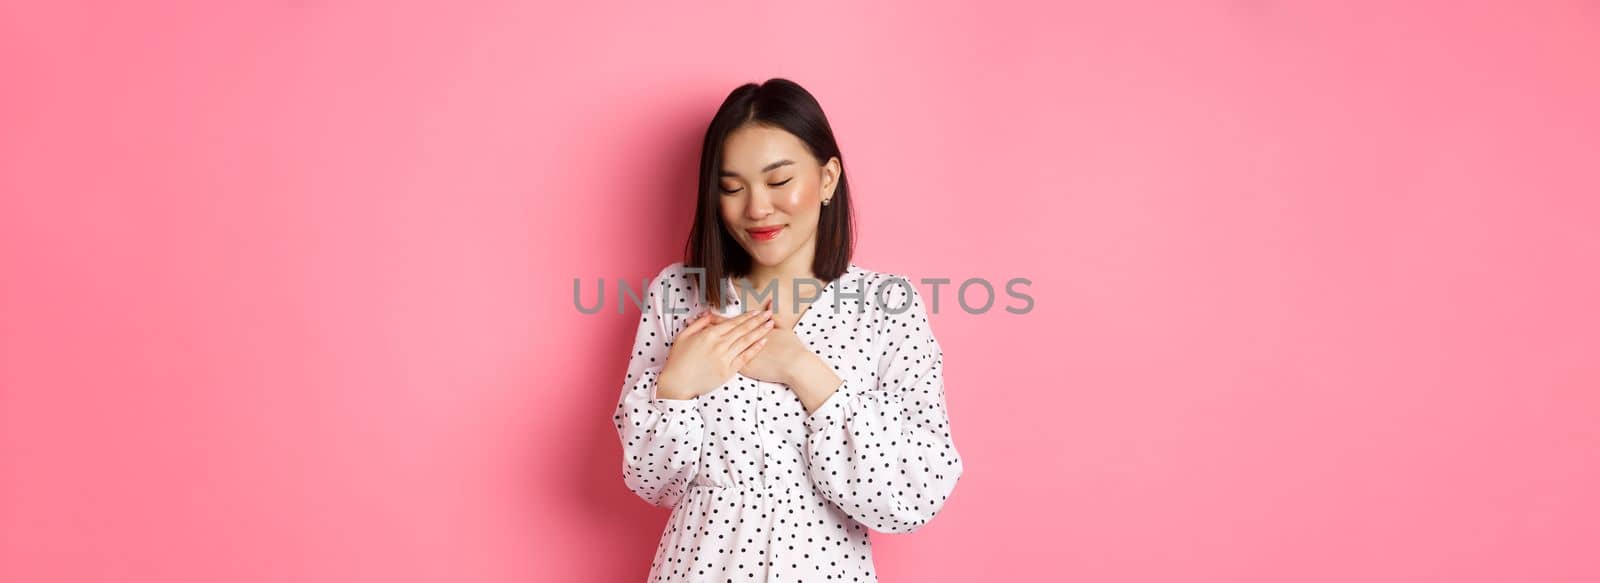 Beautiful korean girl in trendy spring dress dreaming, holding hands on heart, smiling with closed eyes, imaging something or having heartwarming memory, pink background.